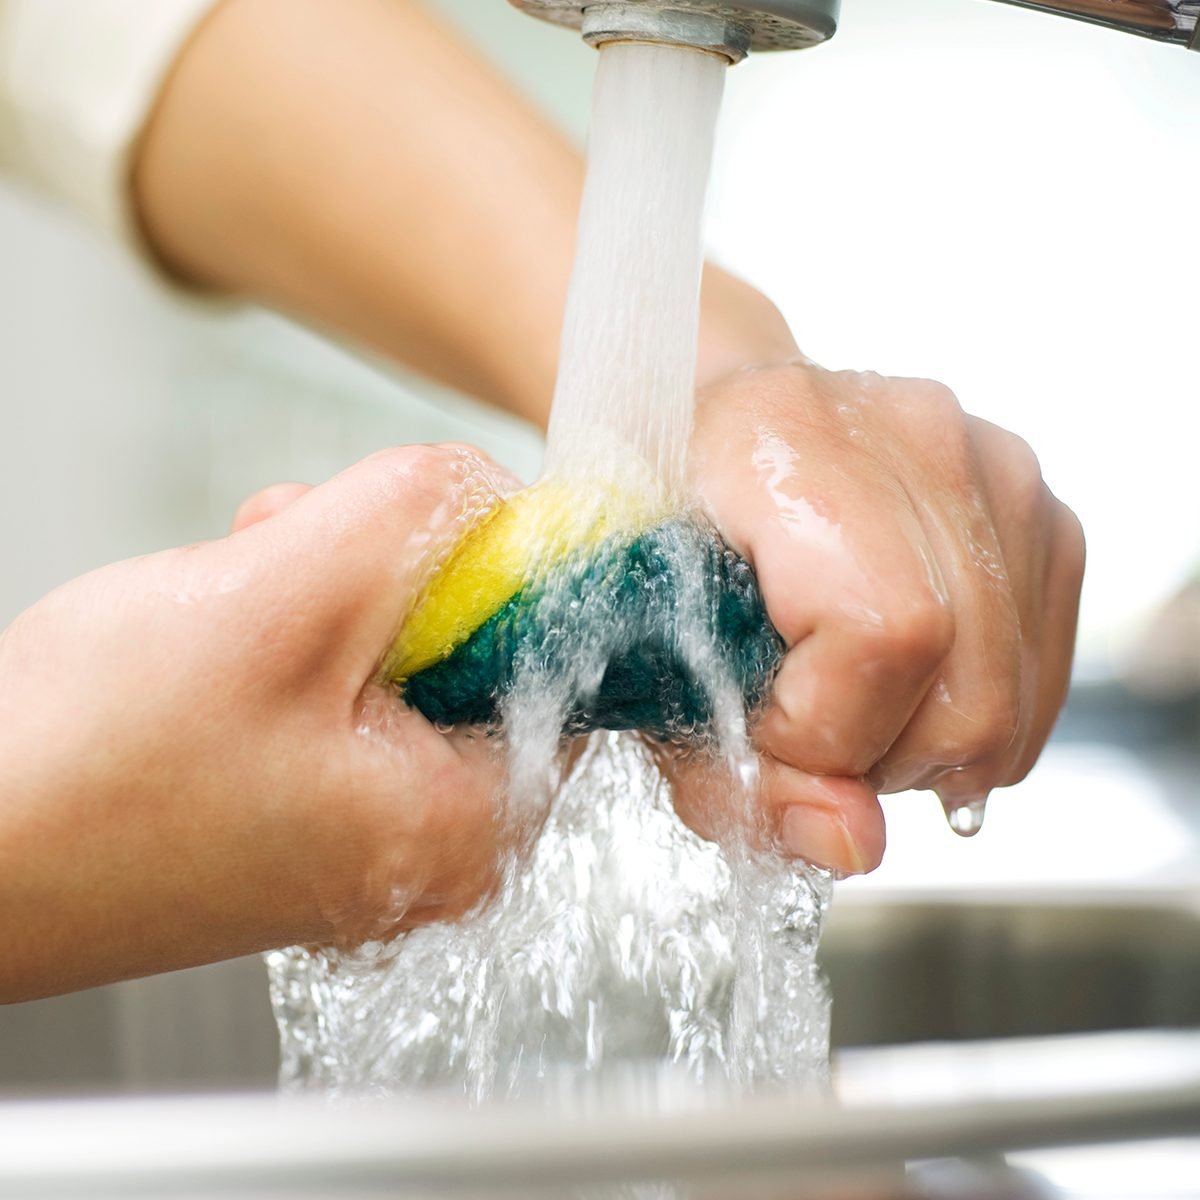 Clean Dish Sponge Do's And Don'ts